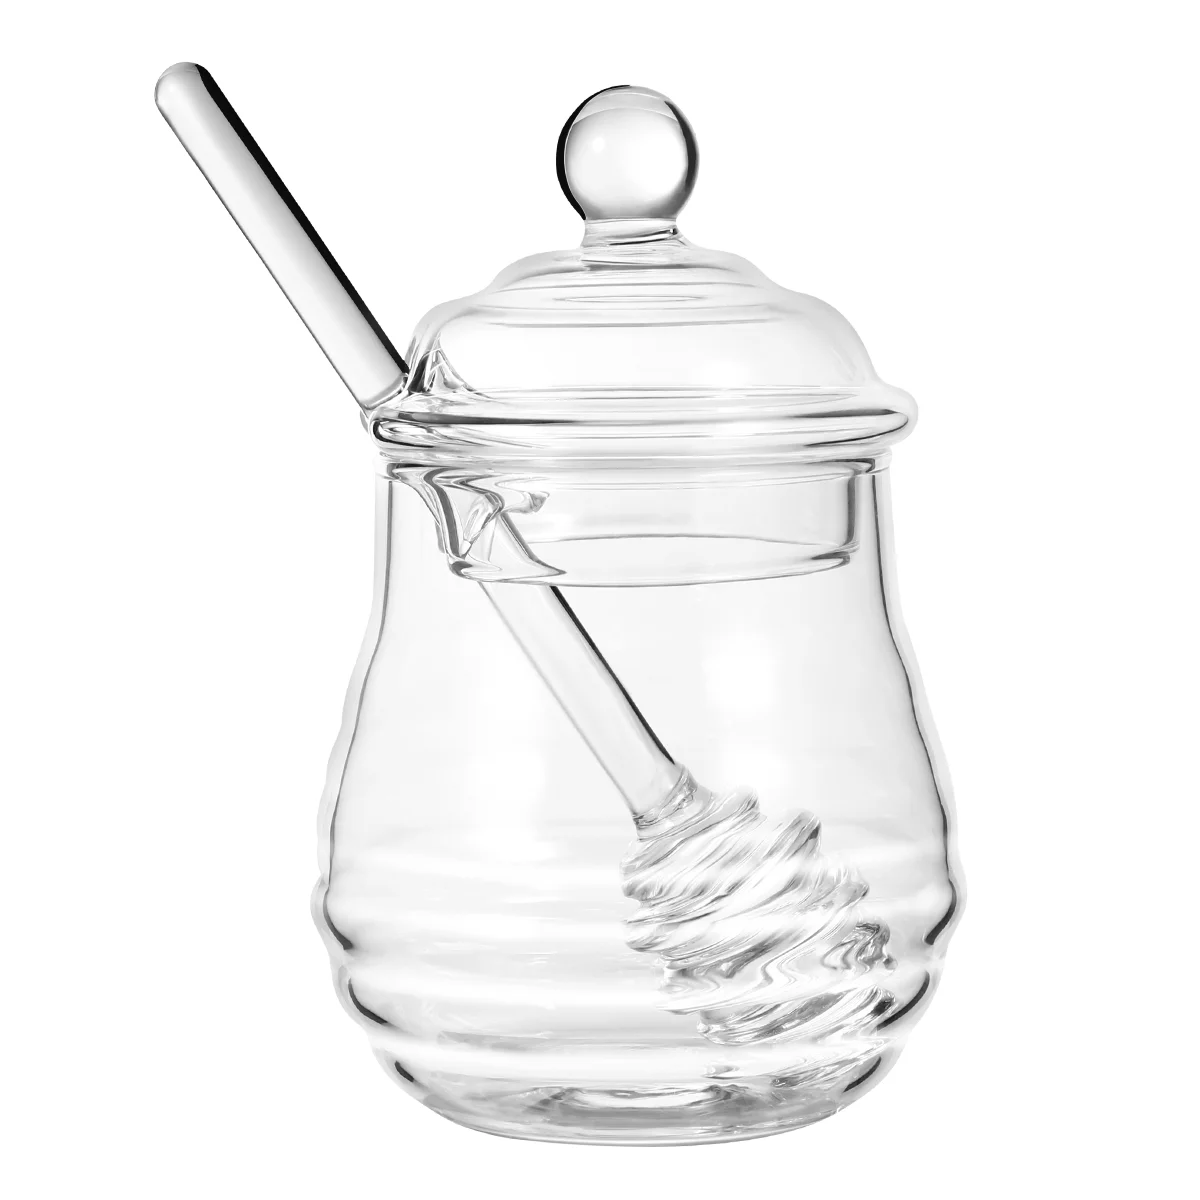 

WINOMO 250ml Glass Honey Pot Clear Jam Jar Set with Dipper and Lid for Home Kitchen Use